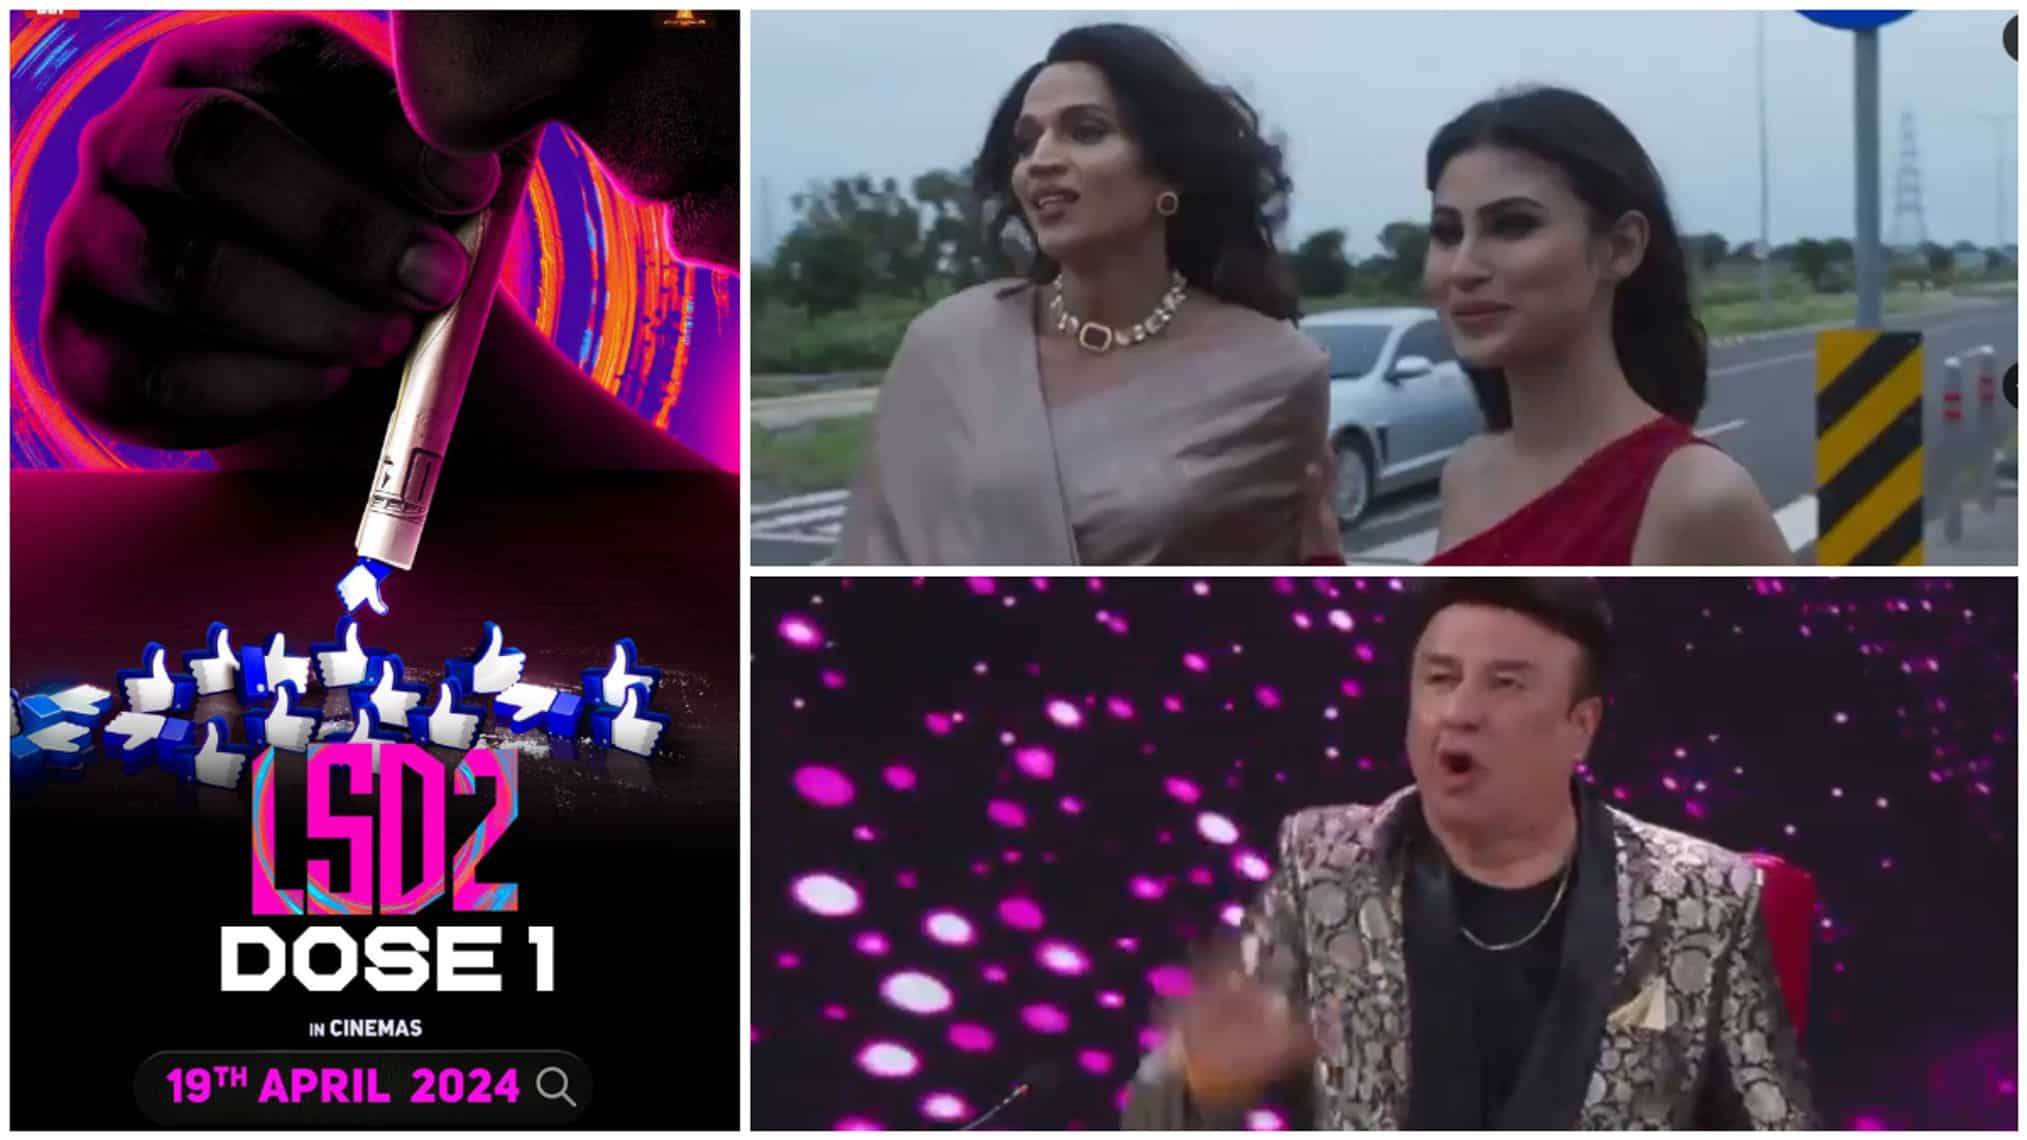 https://www.mobilemasala.com/movies/Love-Sex-Aur-Dhokha-2-teaser-OUT-Mouni-Roy-Anu-Malik-and-more-celebs-ready-to-entertain-audiences-in-this-bold-daring-film-i228925